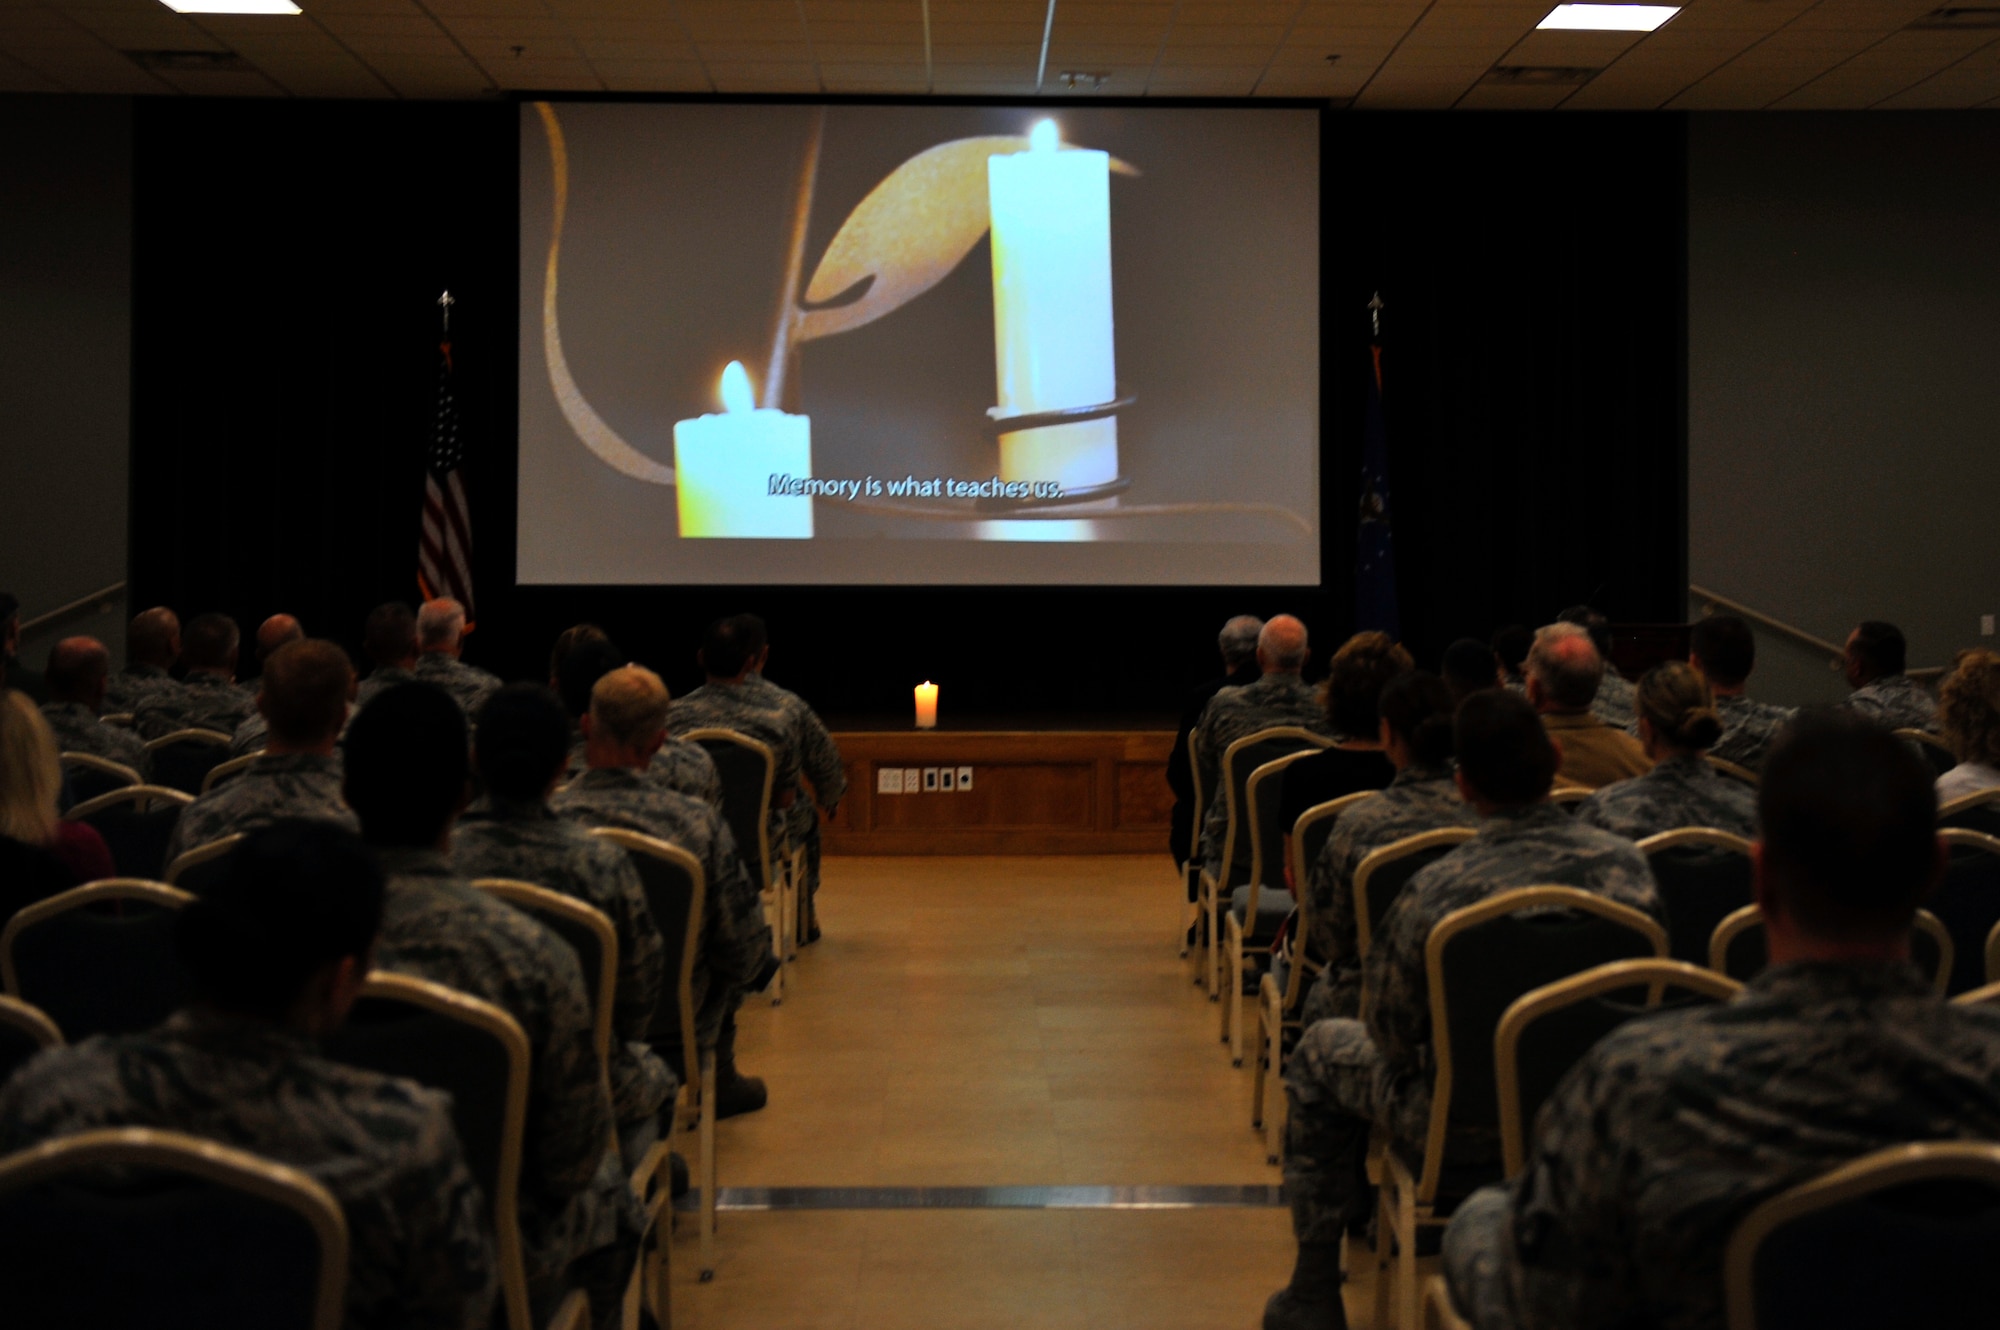 Service members watch a Holocaust remembrance video, May 5, 2016, at Little Rock Air Force Base. The Holocaust began in 1933 when Adolf Hitler came to power in Germany and ended in 1945 when the Nazi regime was defeated by the Allied powers (U.S. Air Force photo by Kevin E. Sommer Giron)